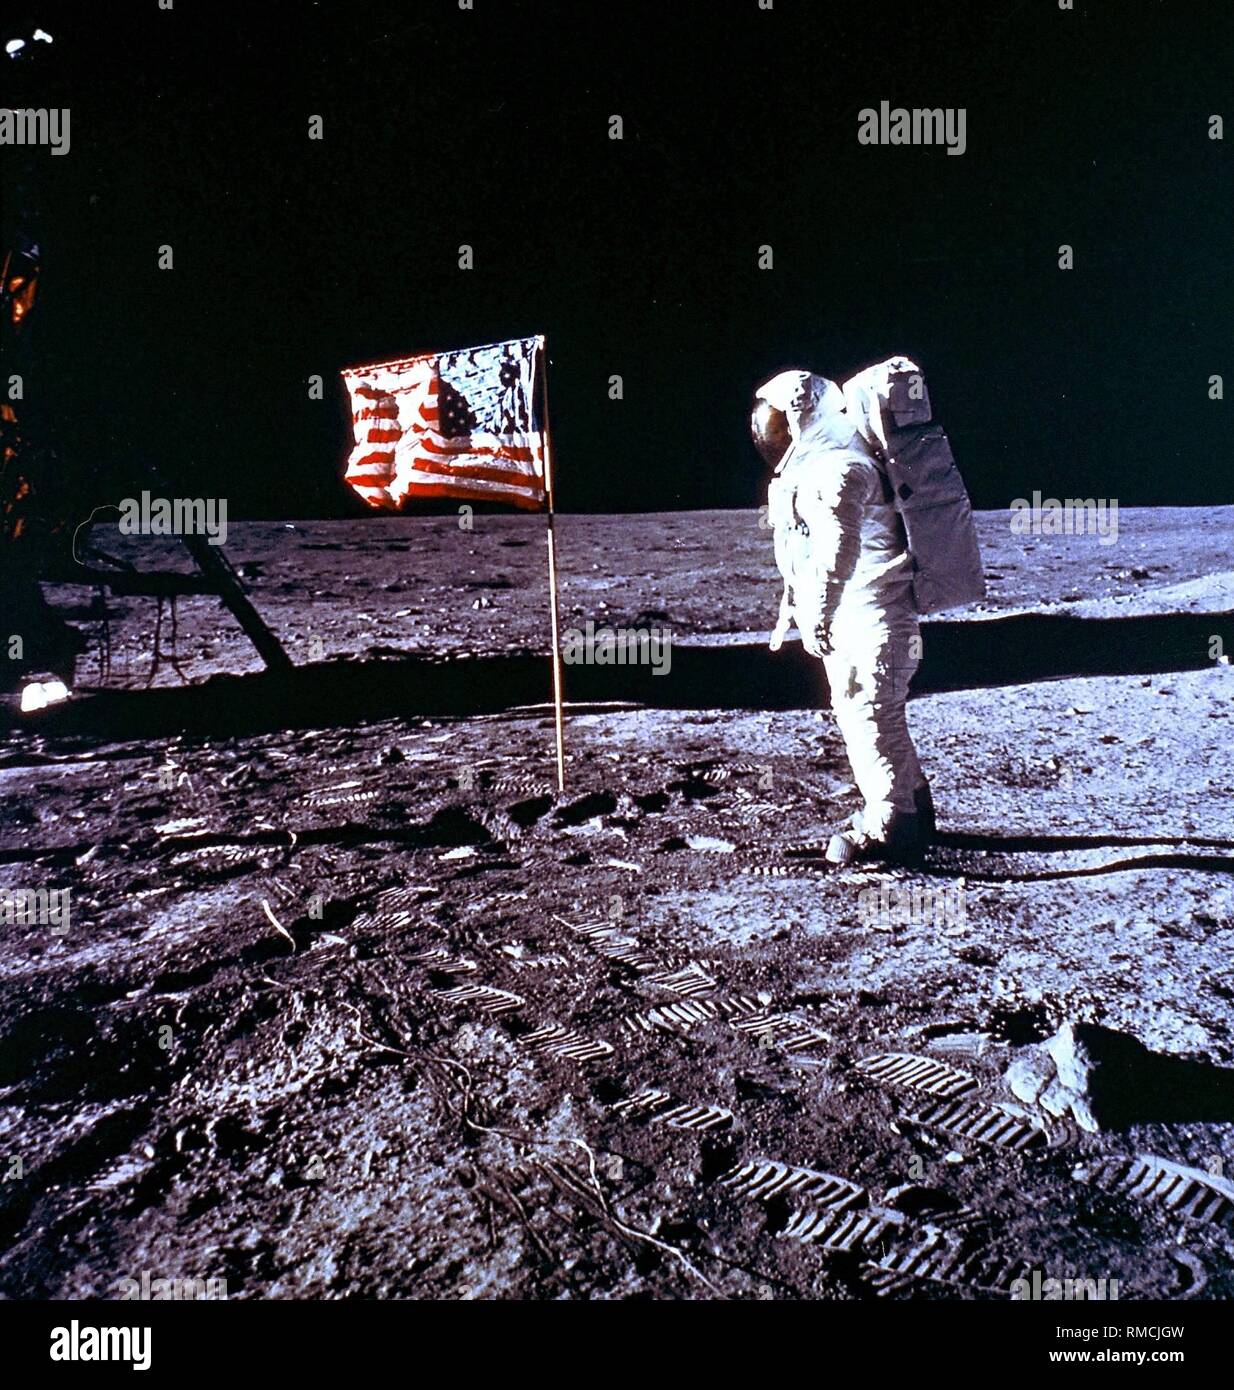 Edwin 'Buzz' Aldrin, the second man on the Moon and commander of the Apollo 11 Lunar Module 'Eagle', walking on the Moon in front of the US flag. Apollo 11 was the first manned Moon landing mission, with that the most significant space mission for humanity. Stock Photo